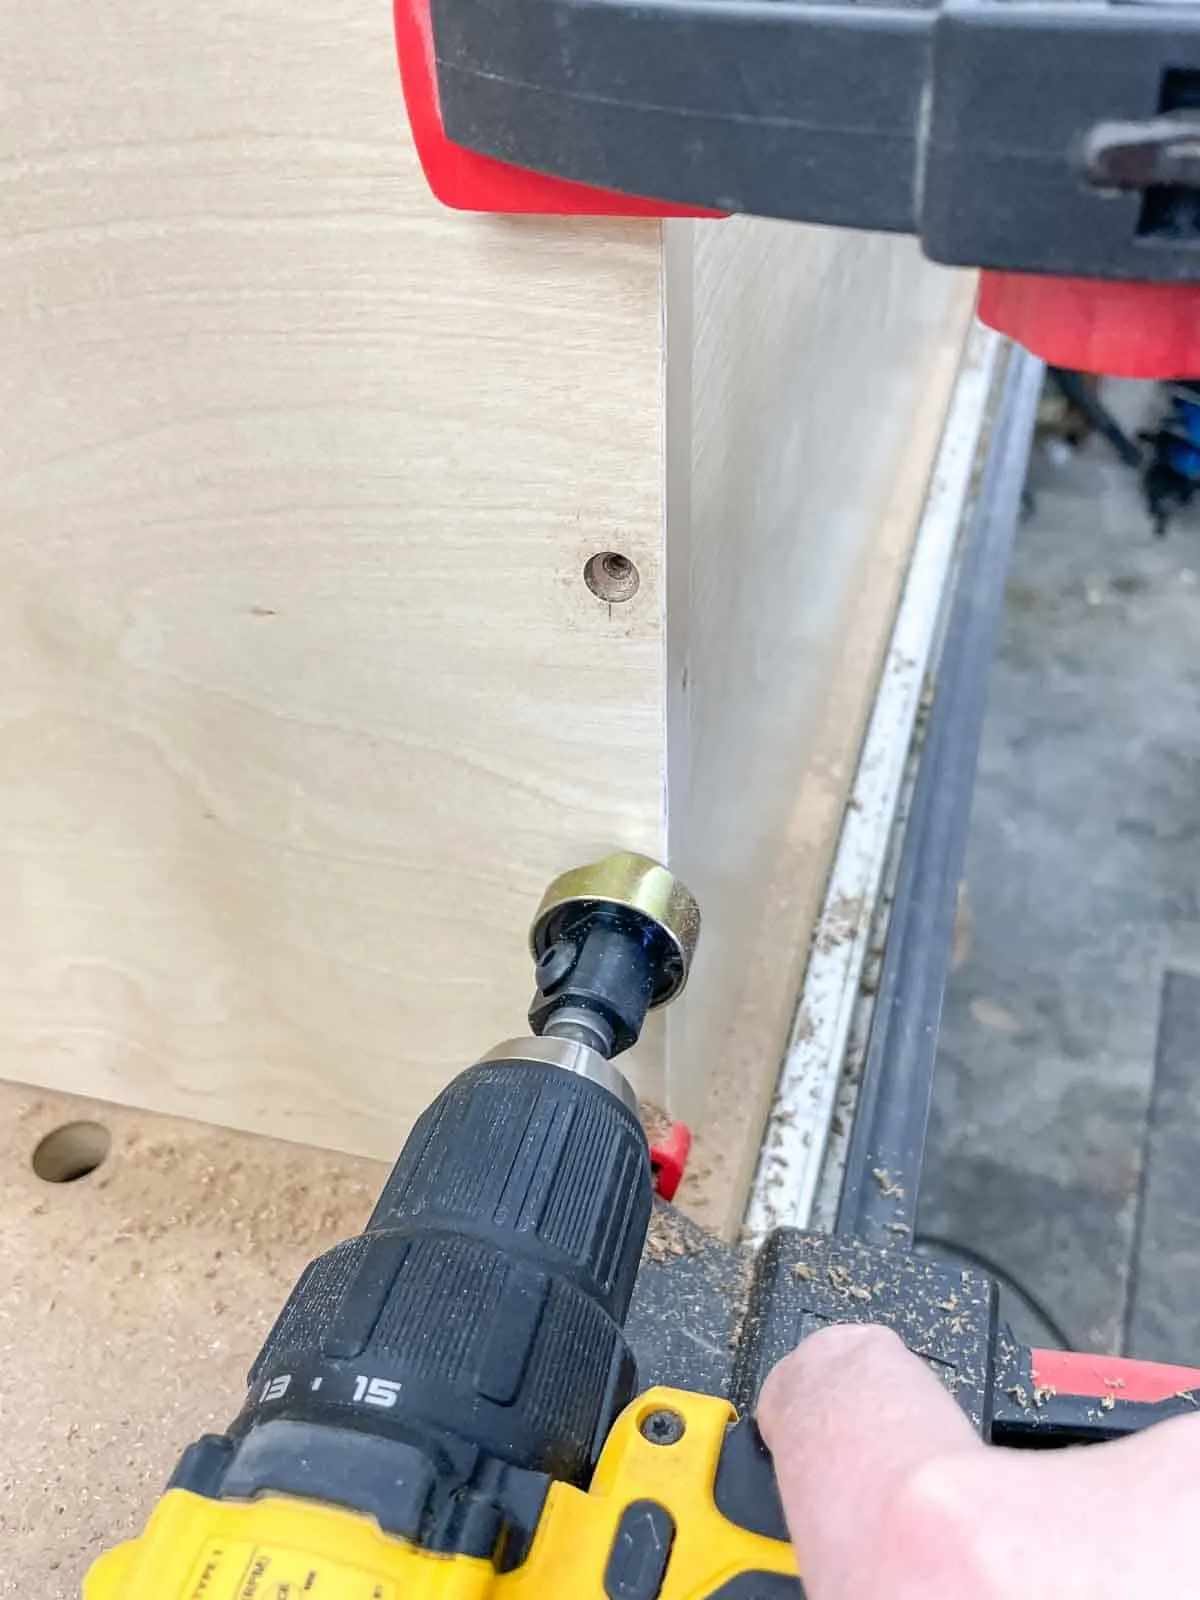 drilling countersink holes in the side of a wall cabinet